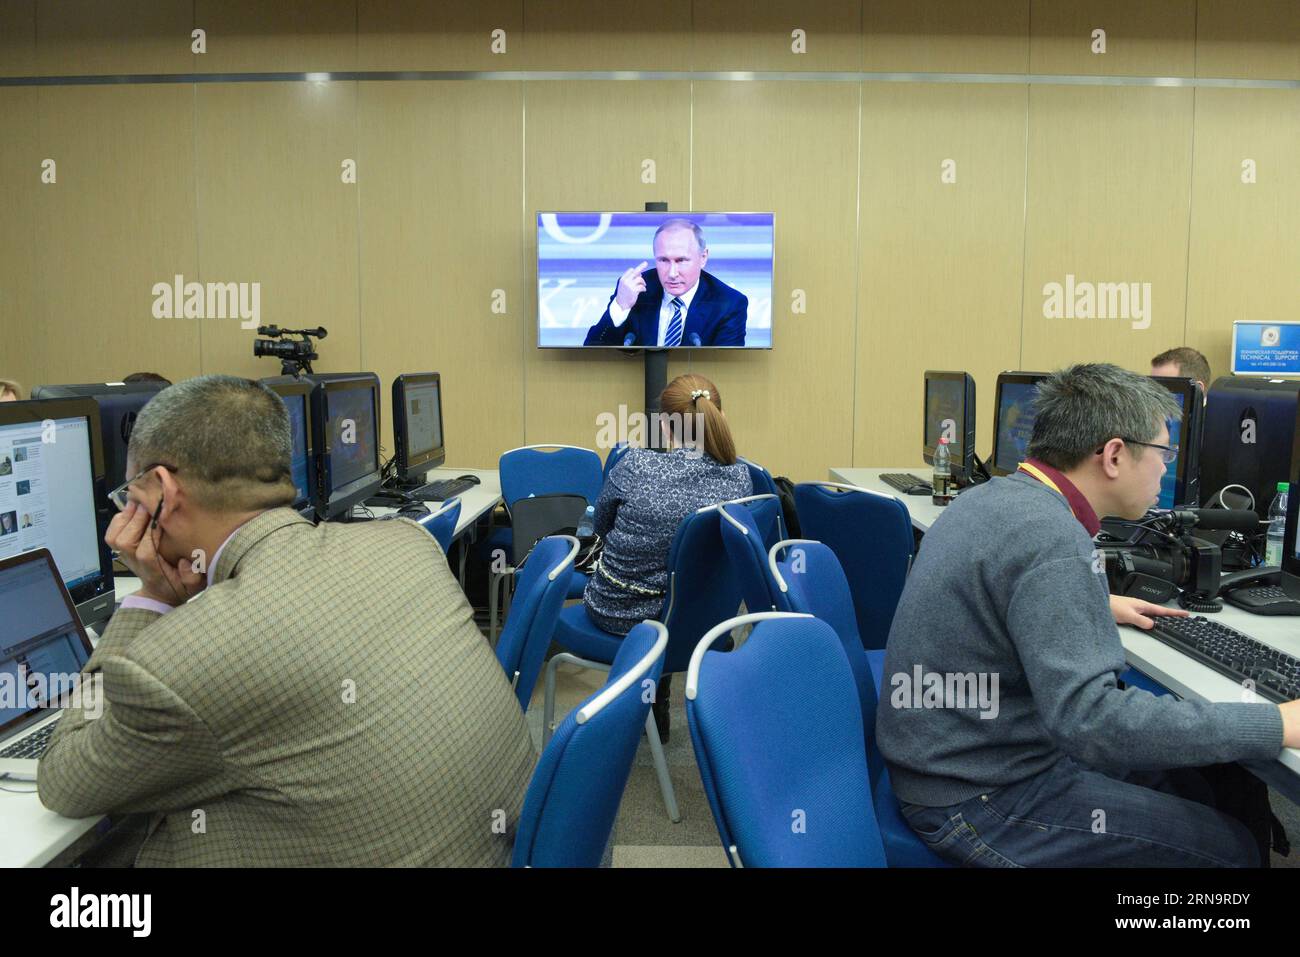 (151217) -- MOSCOW, Dec. 17, 2015 -- Journalists work at media center as Russian President Vladimir Putin speaks during his annual year-end press conference in Moscow, capital of Russia, on Dec. 17, 2015. Russian President Vladimir Putin said Thursday at annual year-end press conference that the economic crisis peak in the country has passed, with signs of stability already shown in second quarter of this year. ) RUSSIA-MOSCOW-PUTIN-YEAR-END PRESS CONFERENCE-ECONOMIC CRISIS PEAK DaixTianfang PUBLICATIONxNOTxINxCHN   151217 Moscow DEC 17 2015 Journalists Work AT Media Center As Russian Presiden Stock Photo